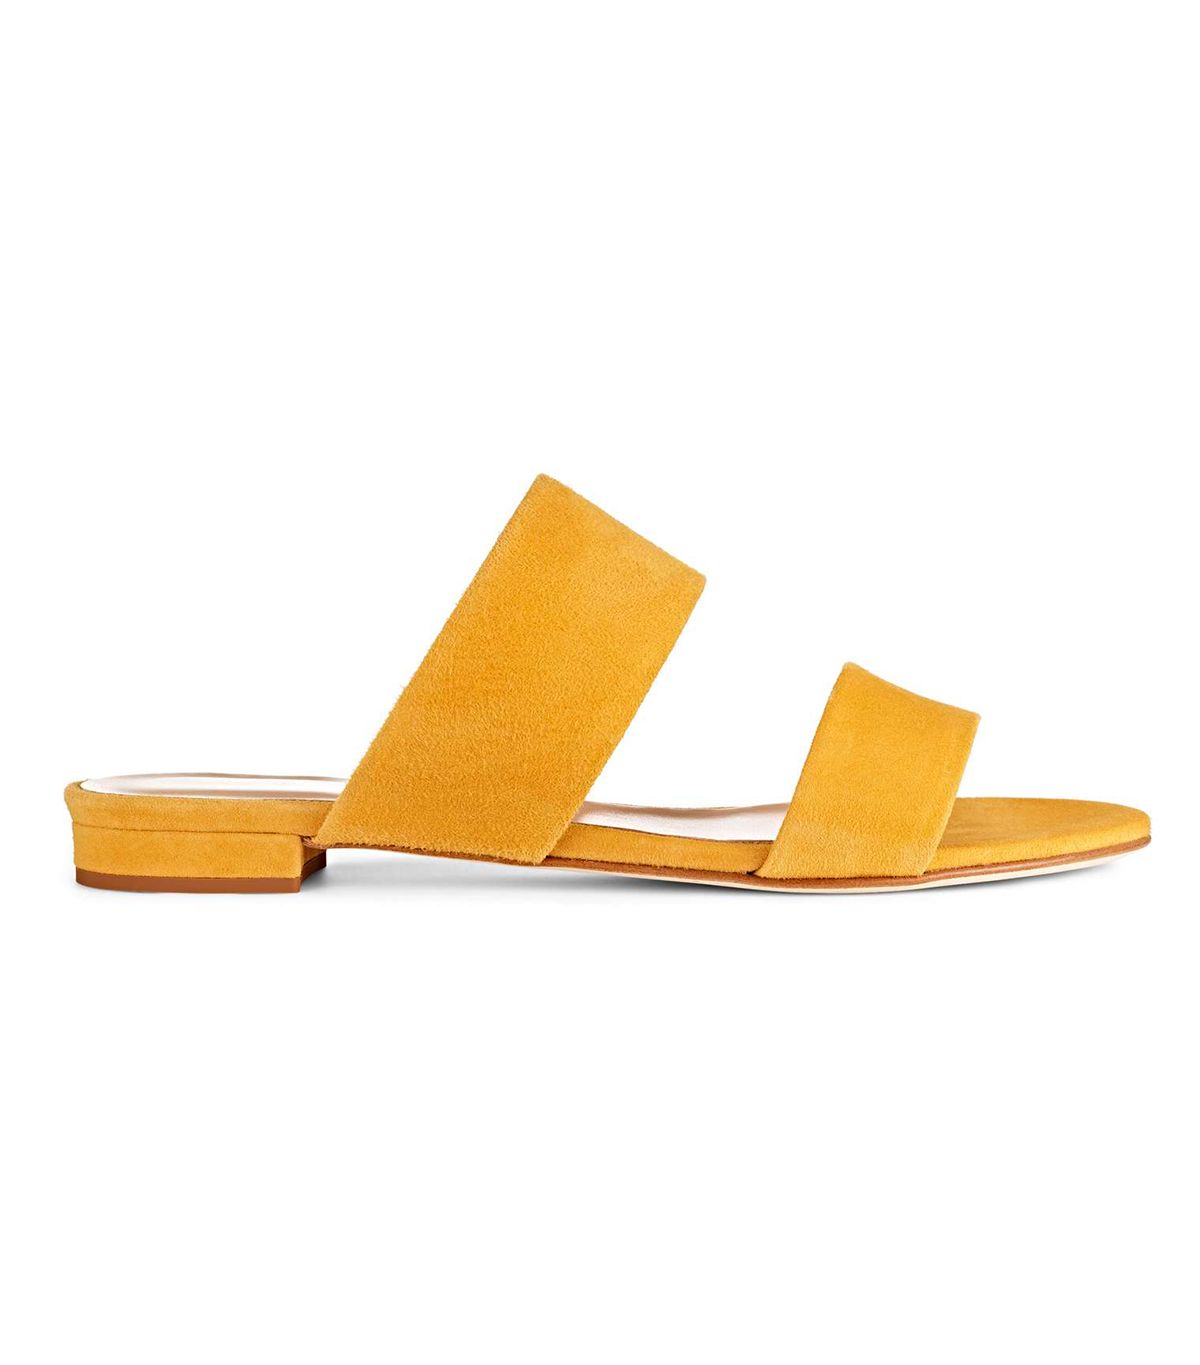 Sandals Designed to Flatter Every Skin Tone | Who What Wear